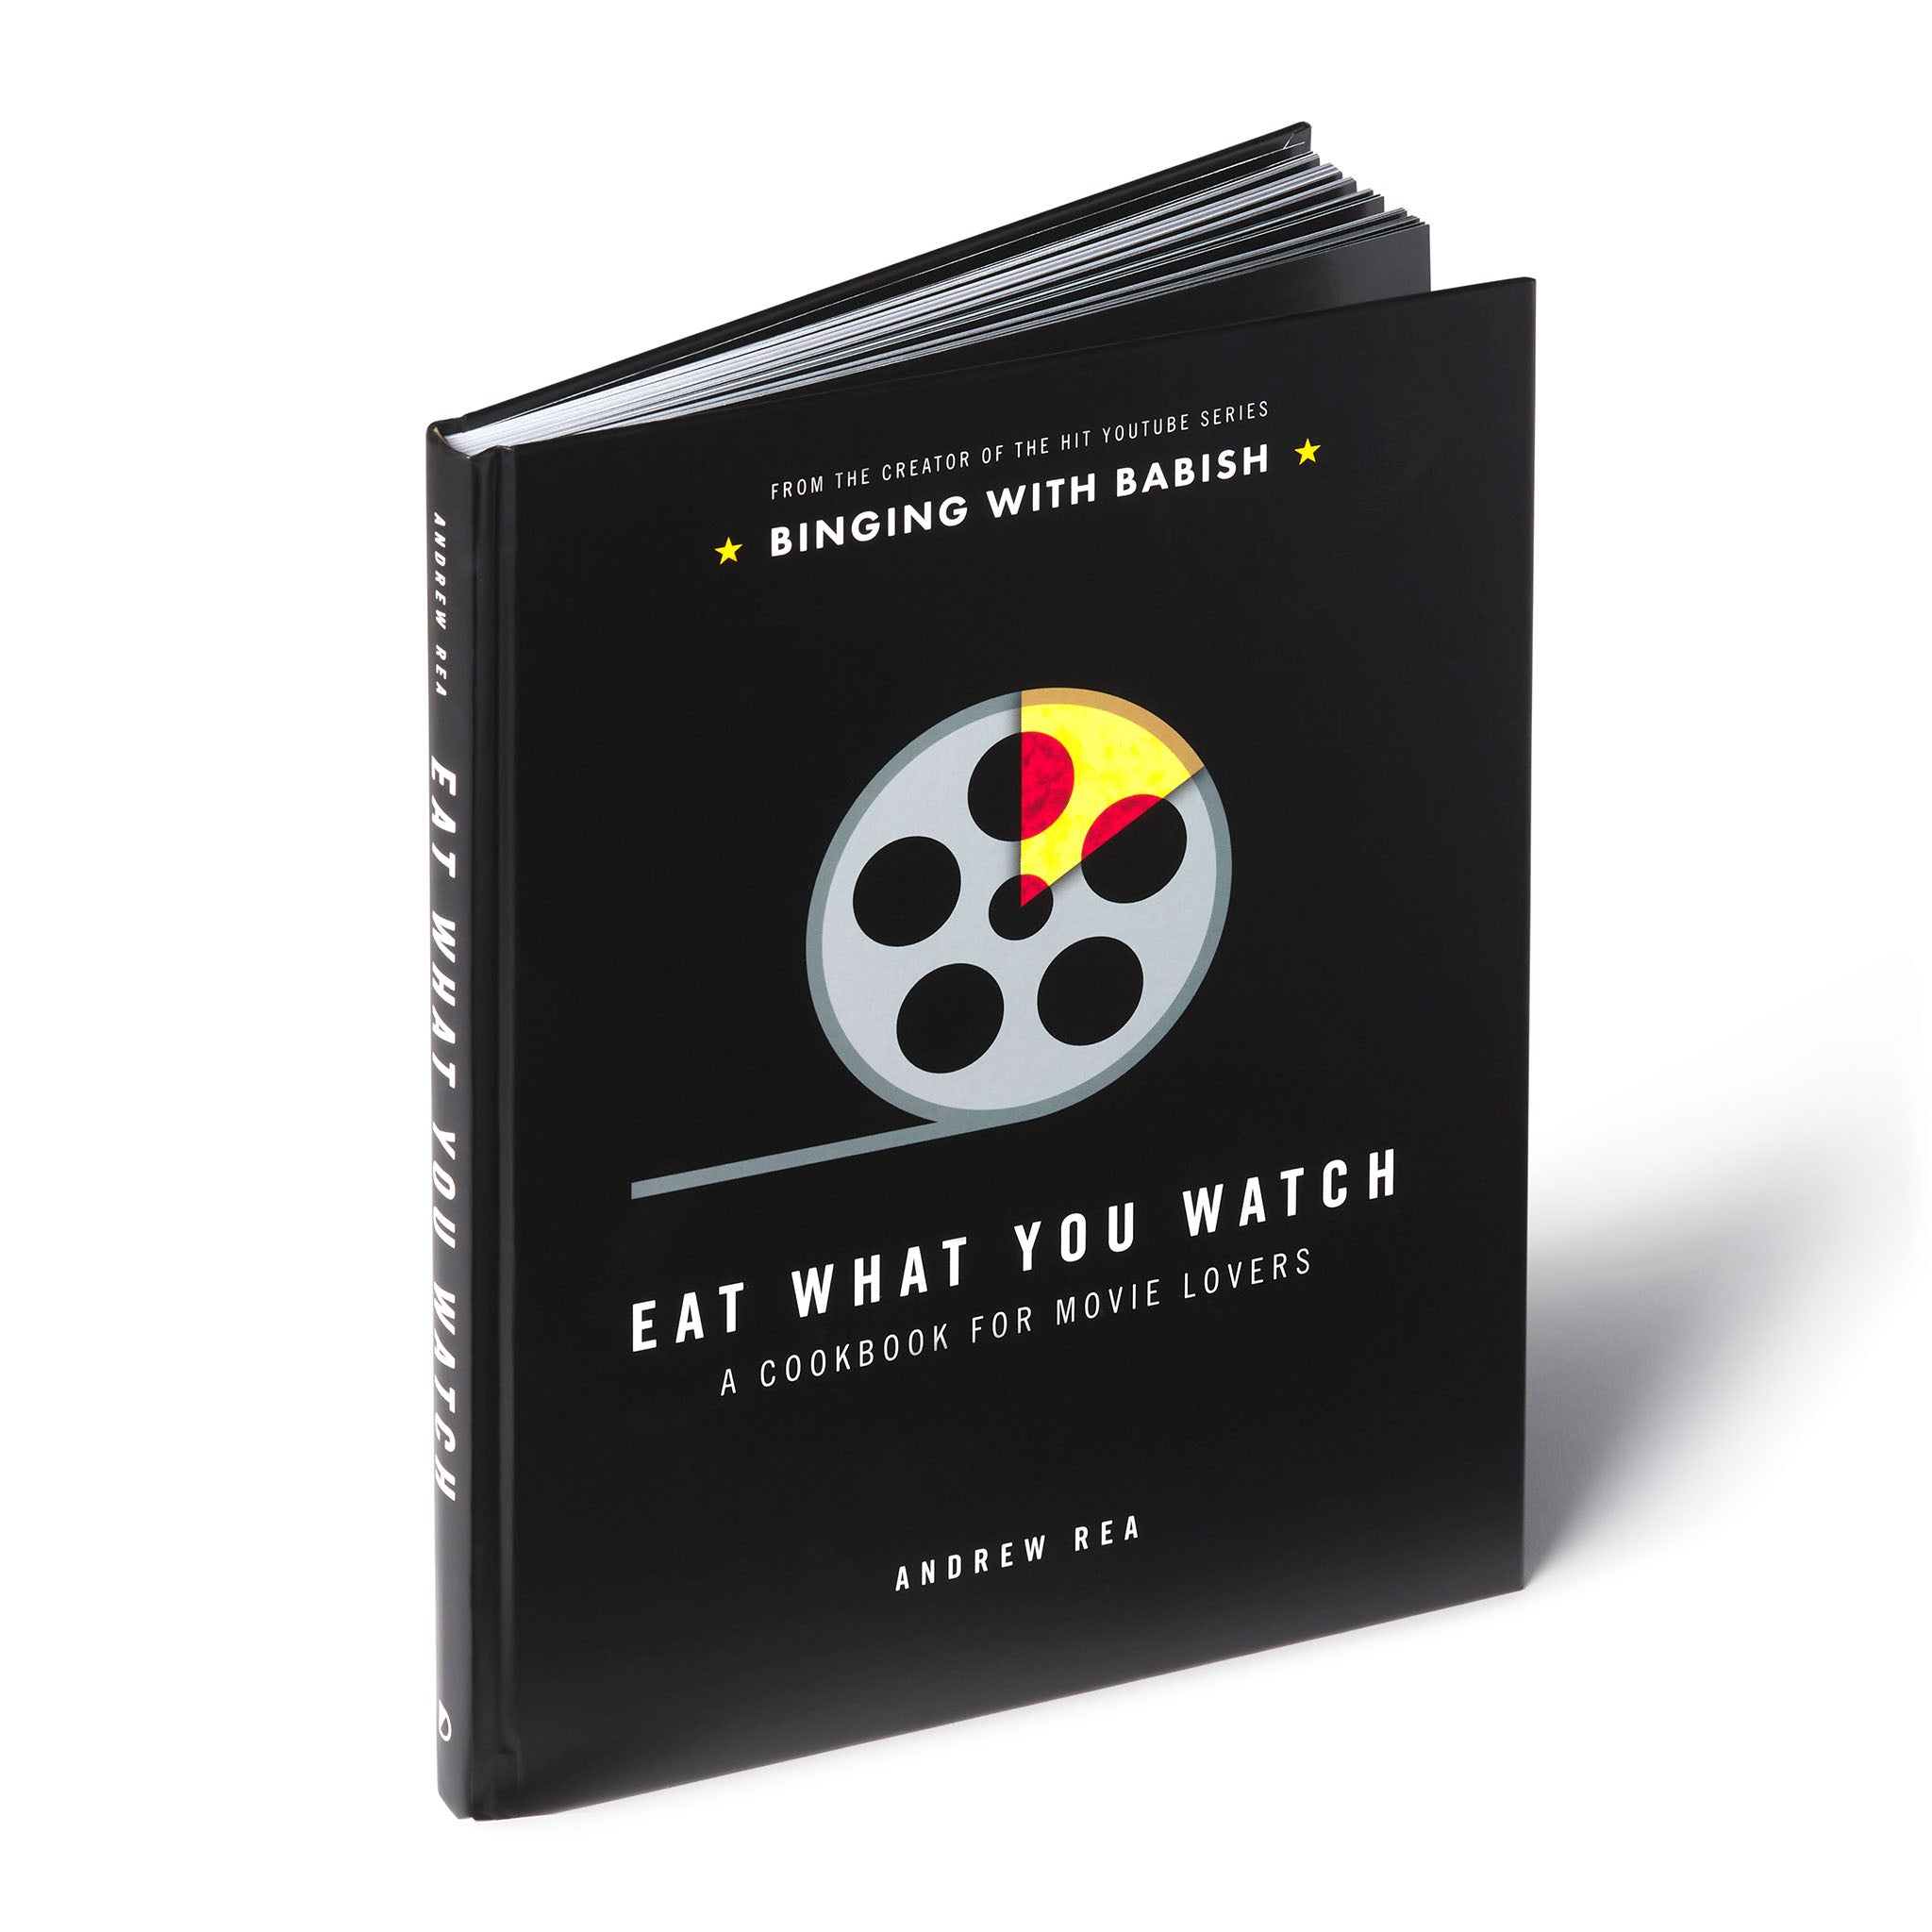 EAT WHAT YOU WATCH COOKBOOK